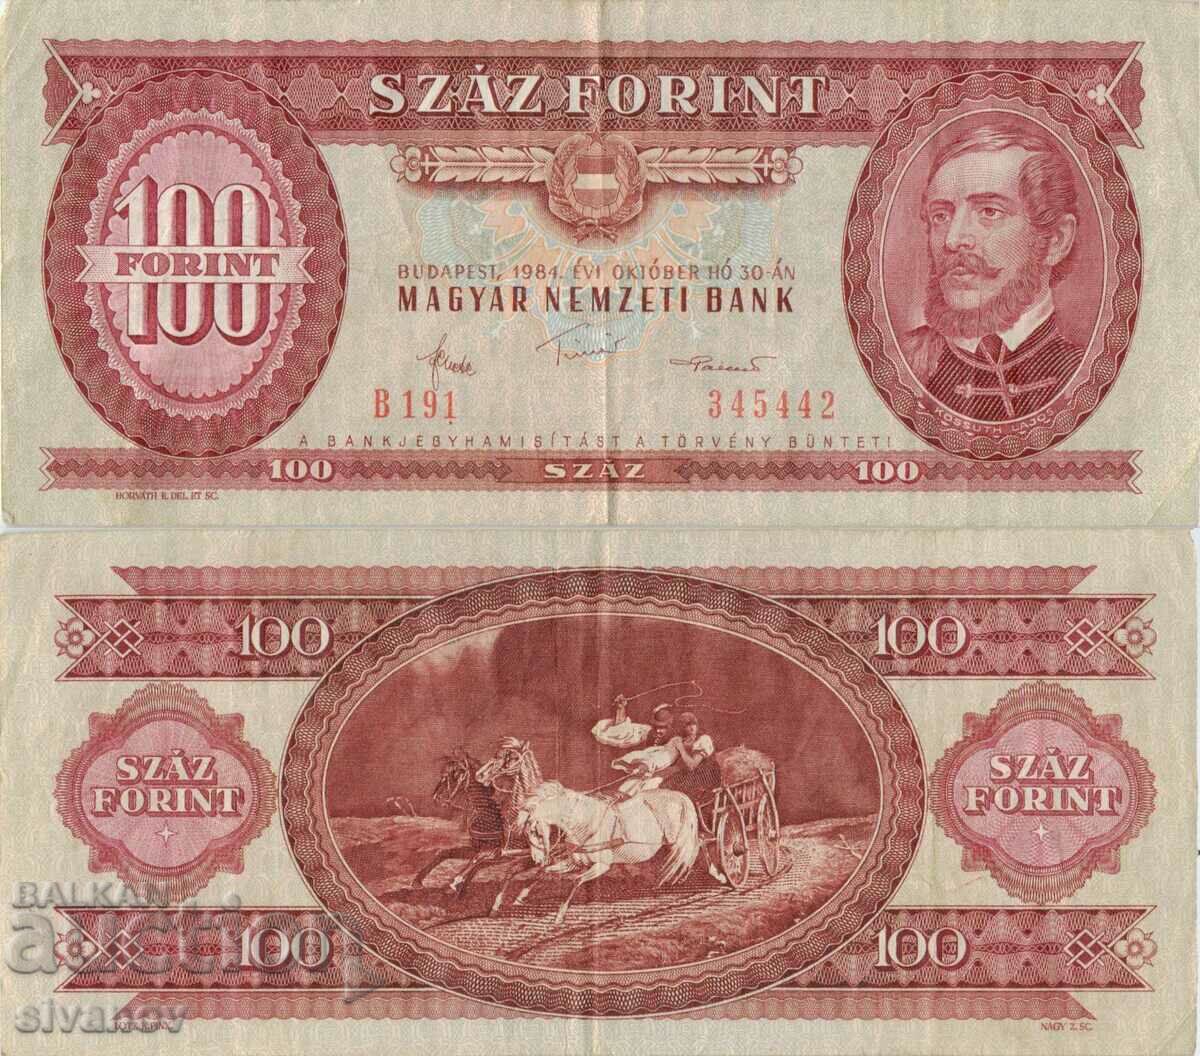 Hungary 100 forint 1984 banknote #5206